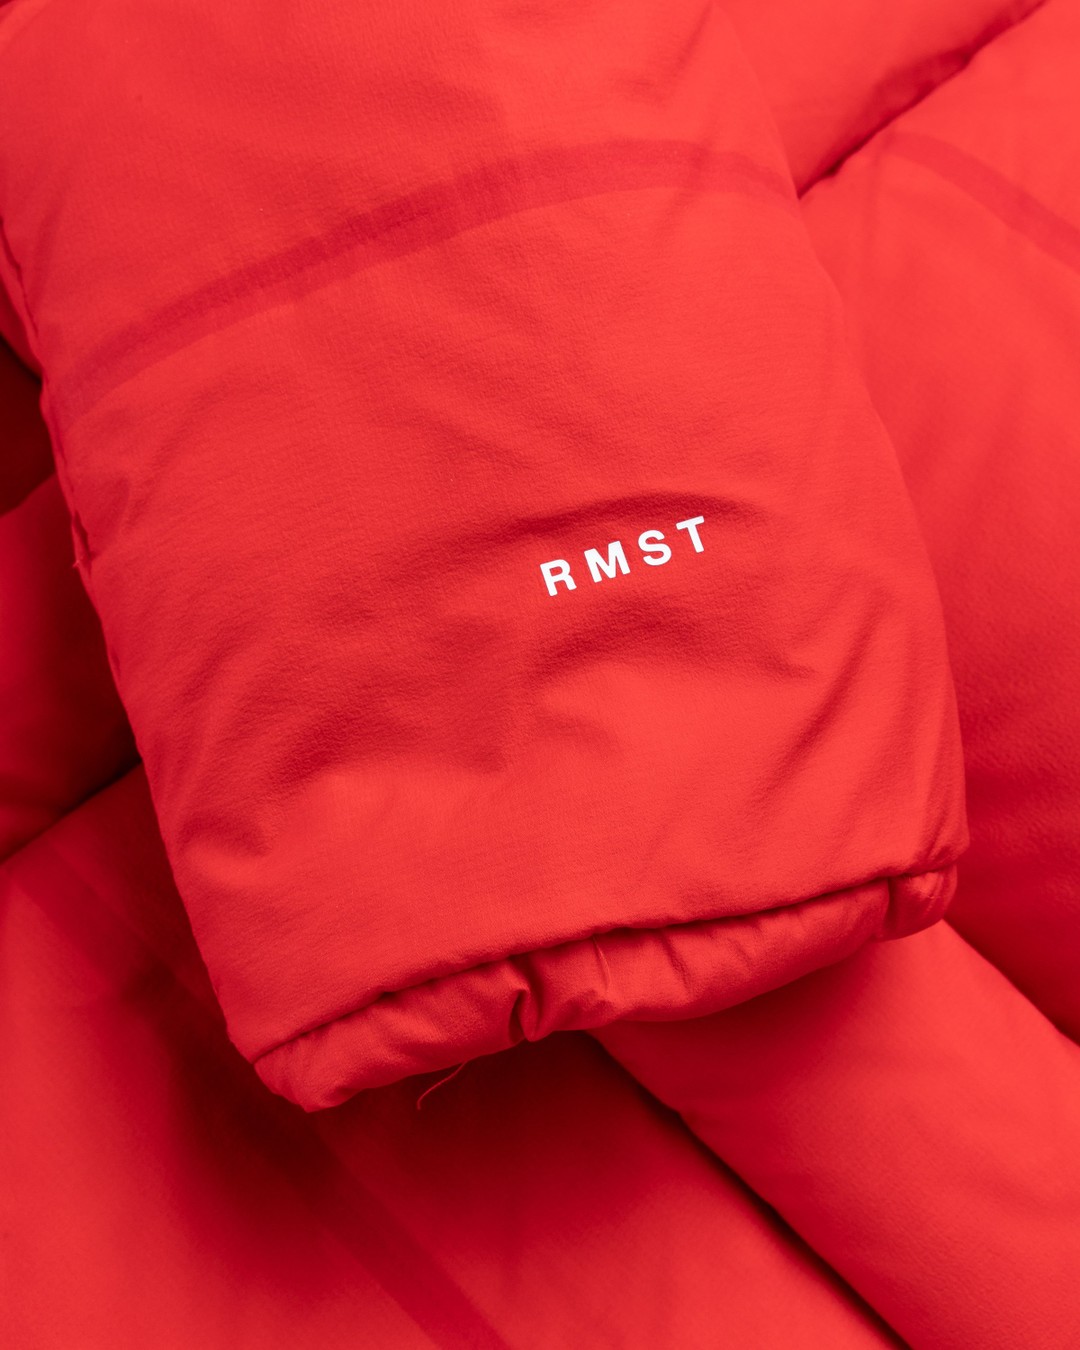 The North Face – RMST Himalayan Parka Red - Down Jackets - Red - Image 6